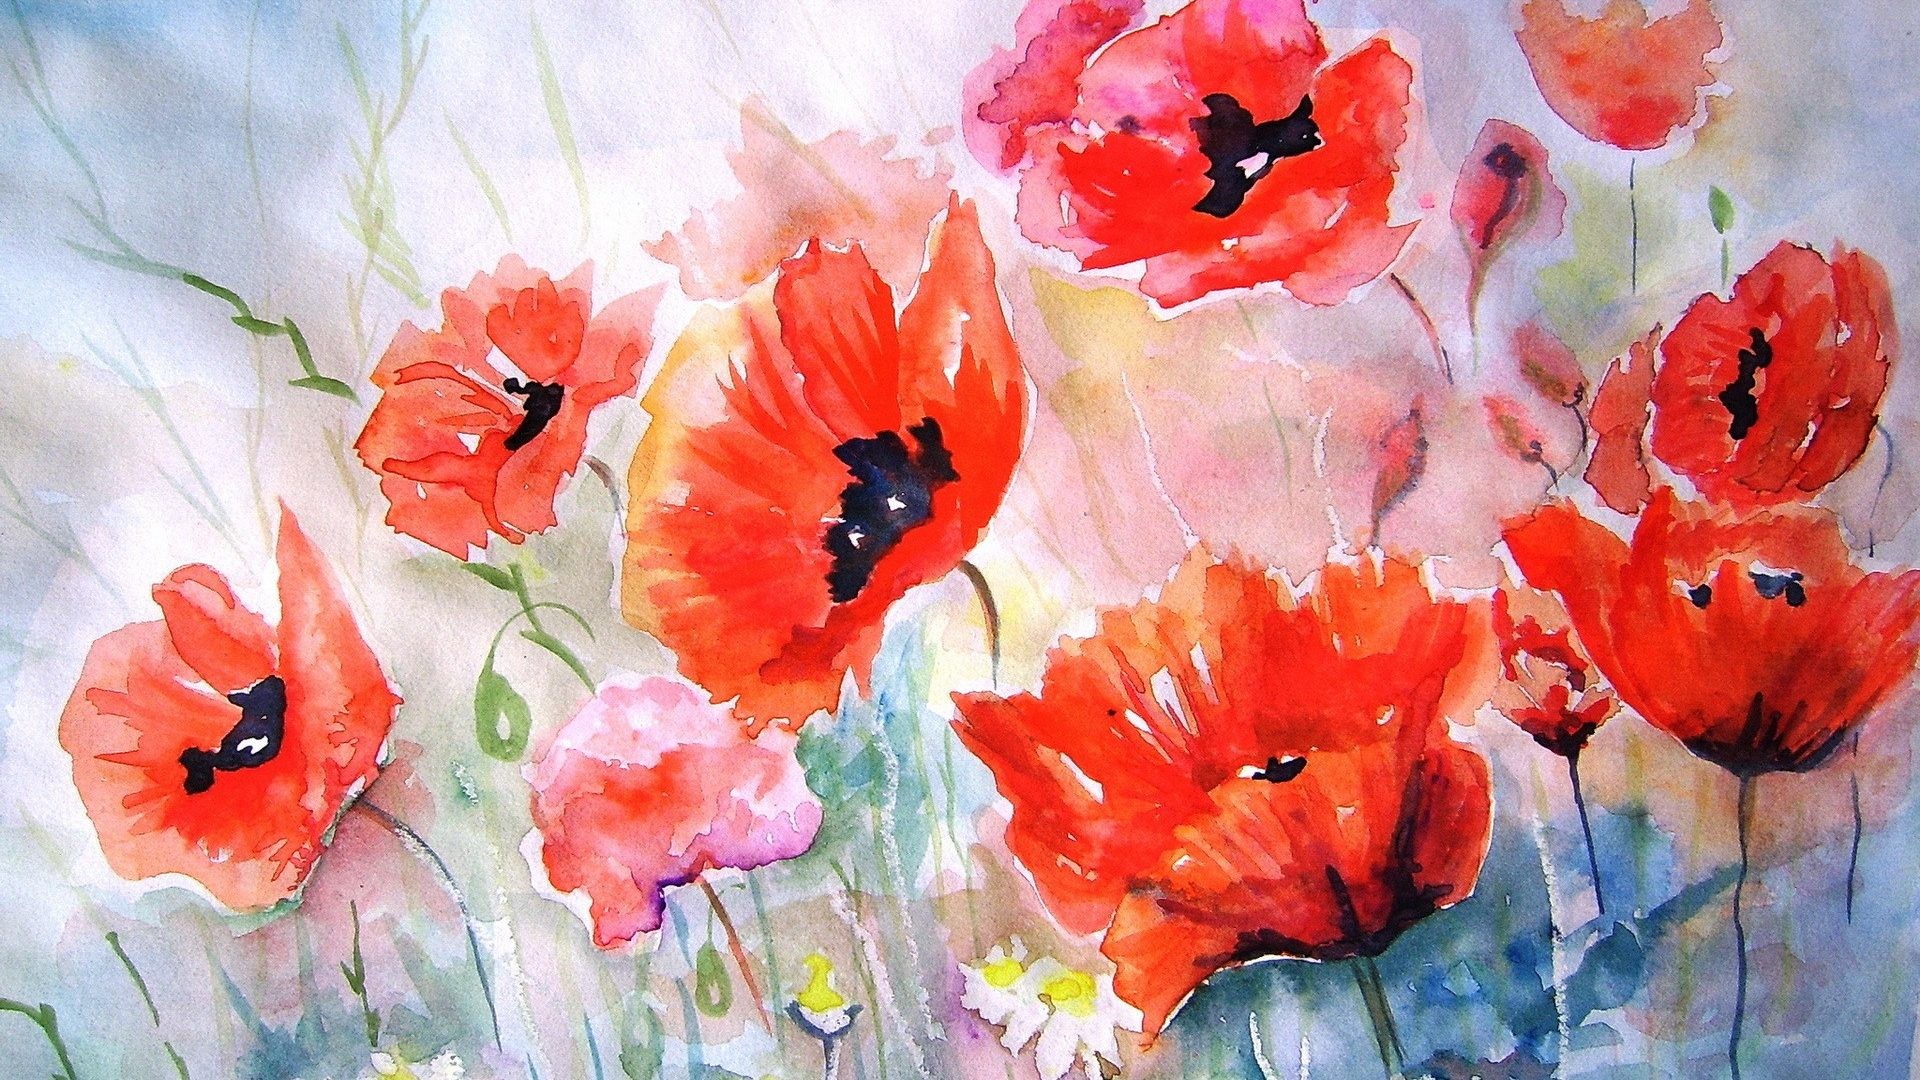 1920x1080 Nature Beautiful Painting Pretty Awesome Poppies Watercolor Flowers Artwork  Red Desktop Wallpaper Flower Pictures